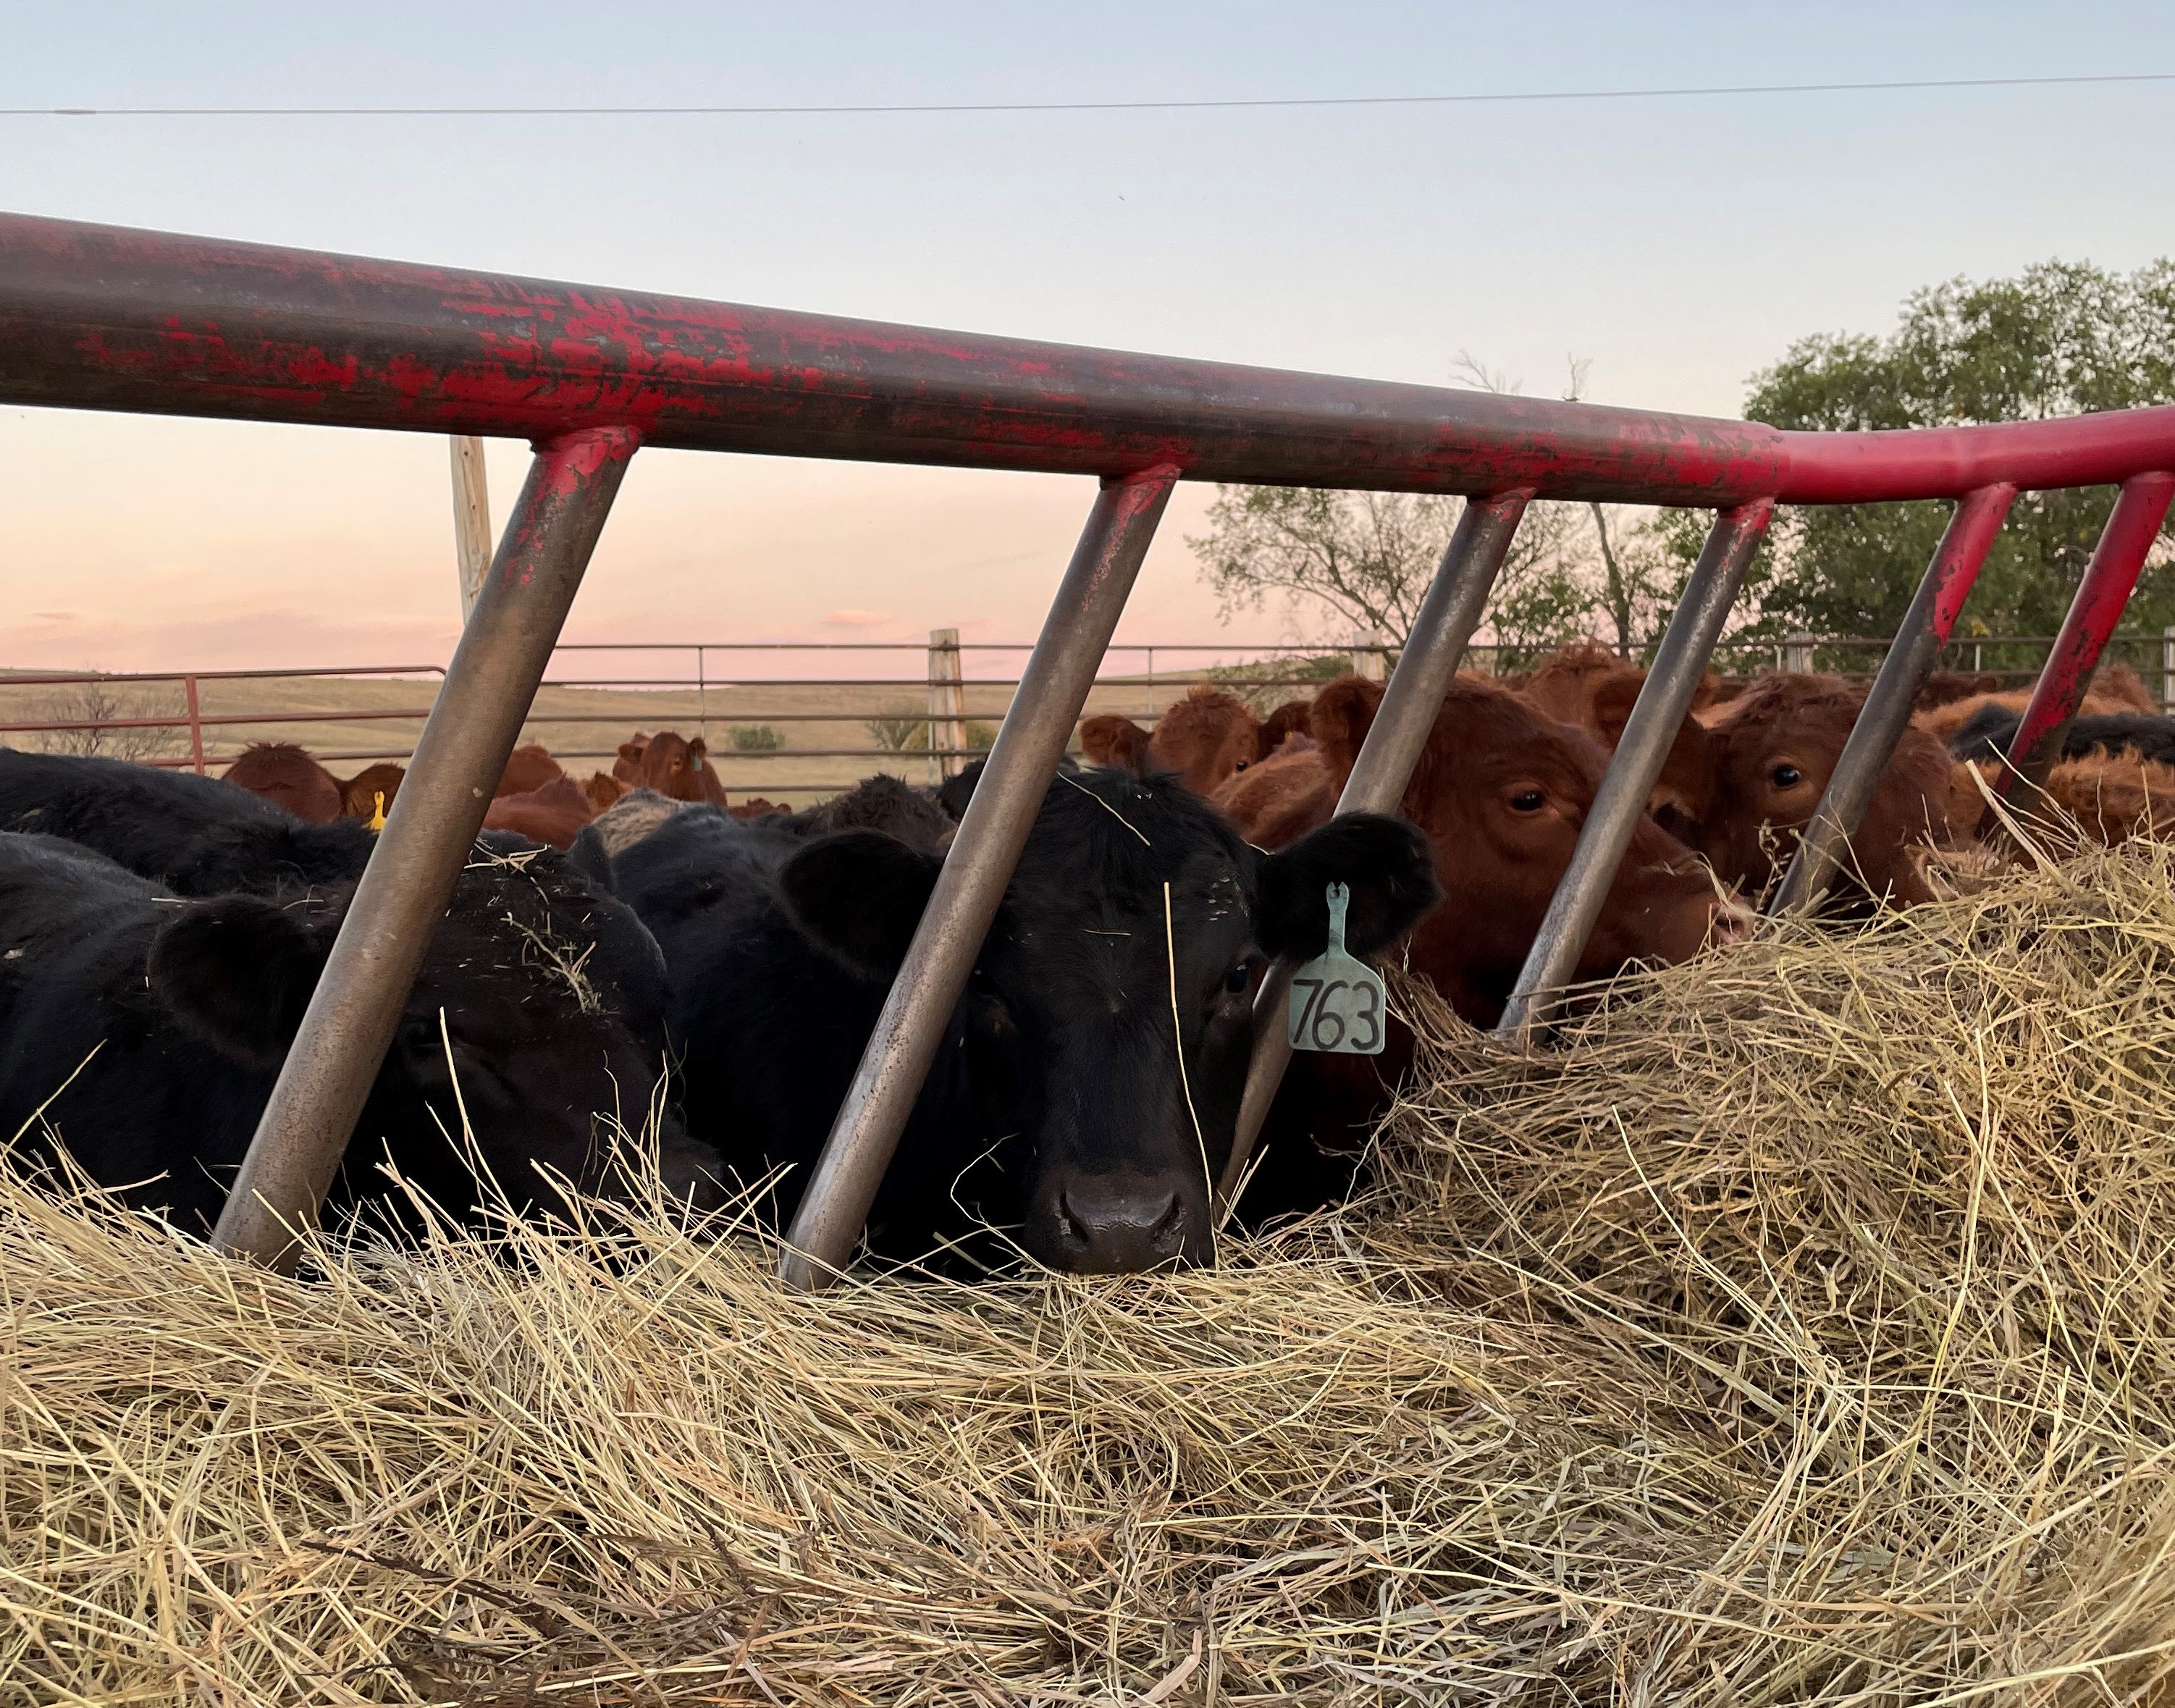 For the first few days of weaning, calves should be provided with high-quality, long-stem grass hay, similar to what they may have consumed on pasture with their dams. (NDSU photo)